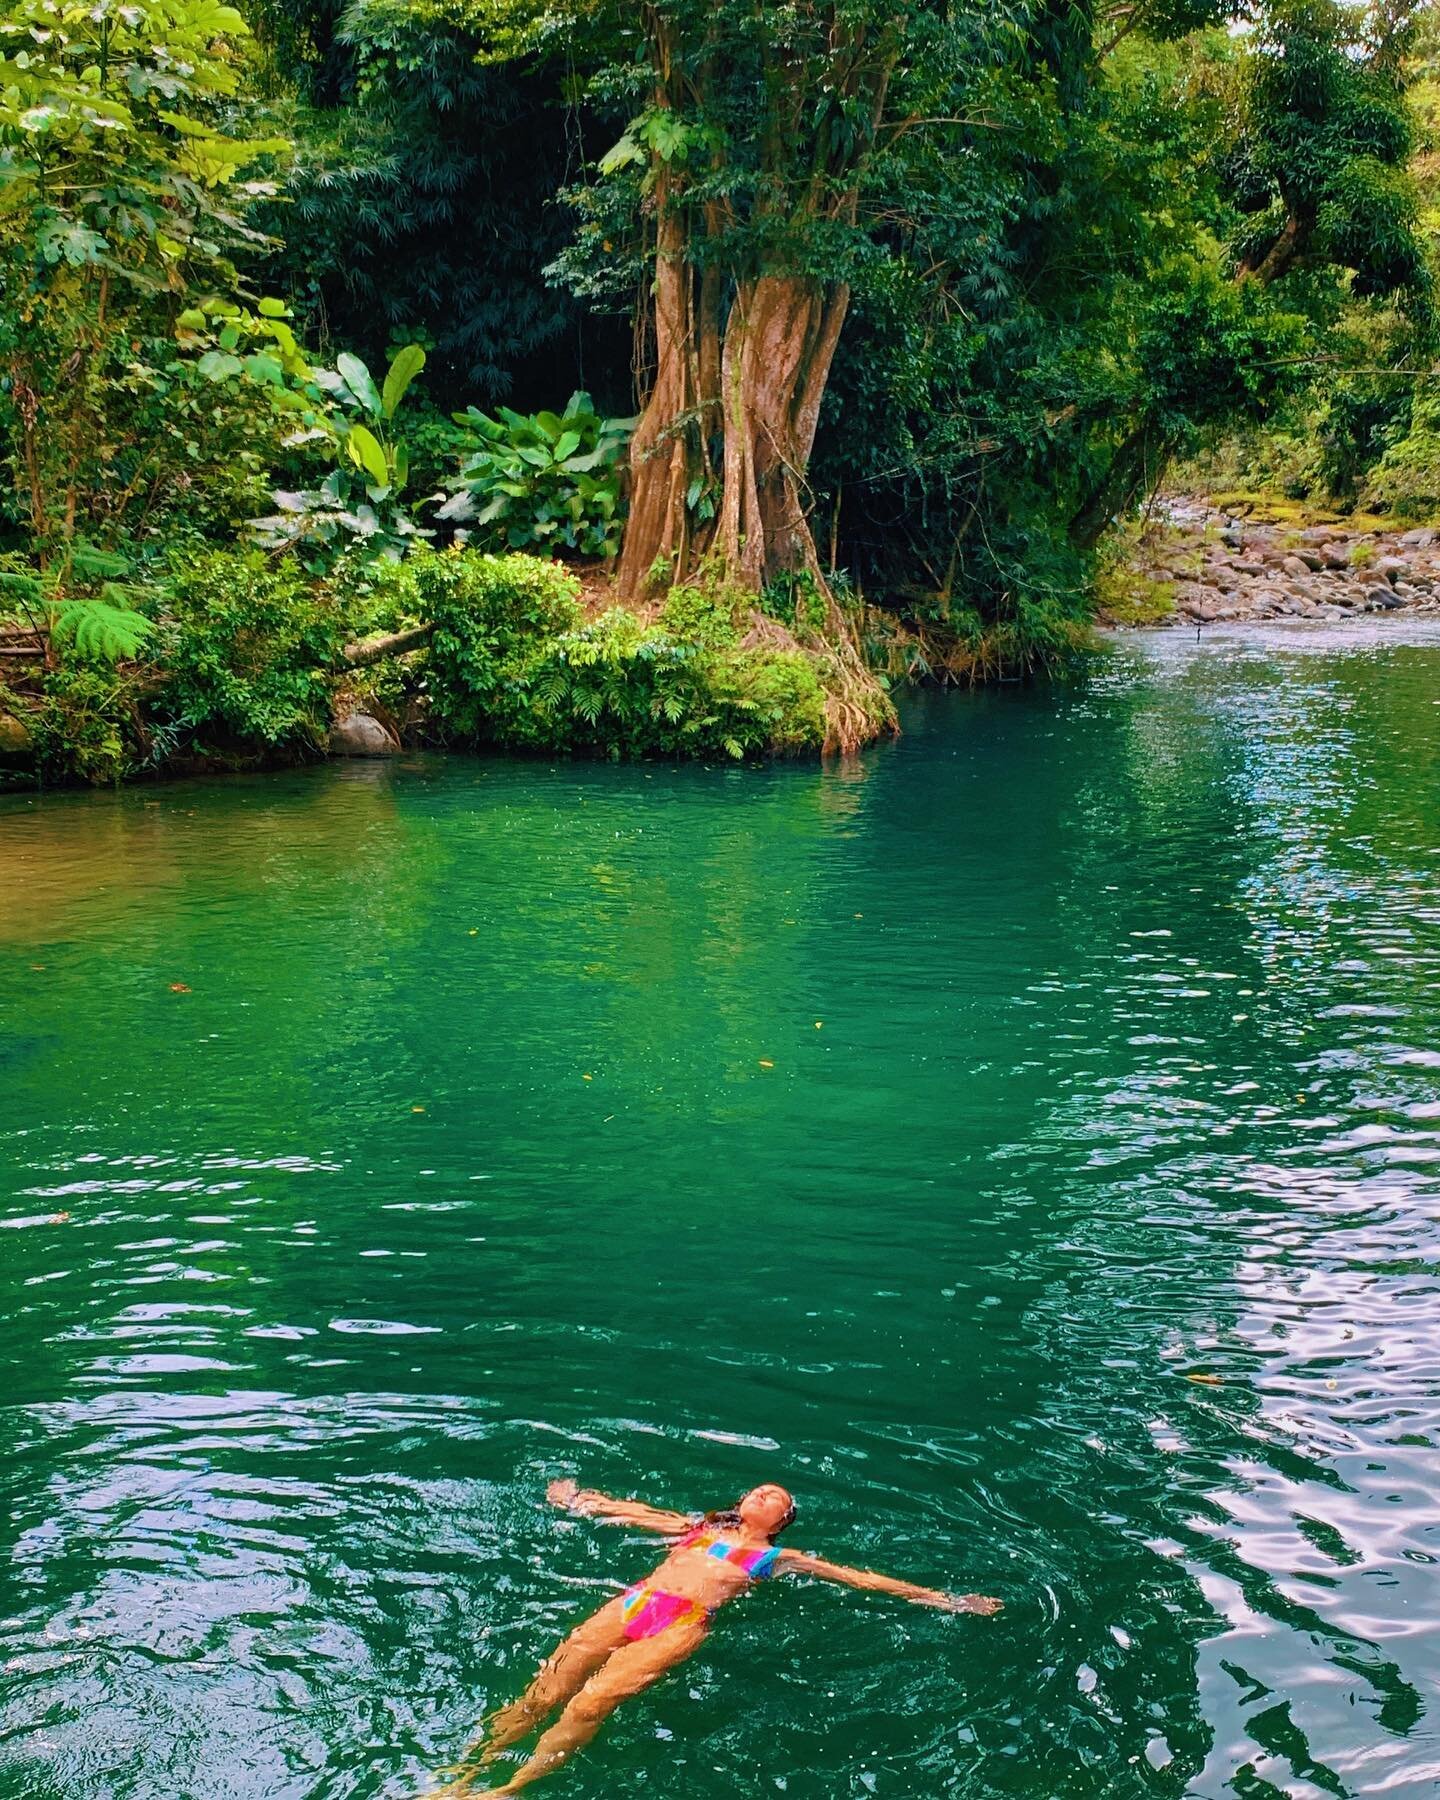 Growing up I had always wanted to go on a rope swing. There was one in my town that I never went to as a kid because I used to be scared that it &ldquo;wasn&rsquo;t allowed.&rdquo; Having my first time on a rope swing in Puerto Rico was definitely so